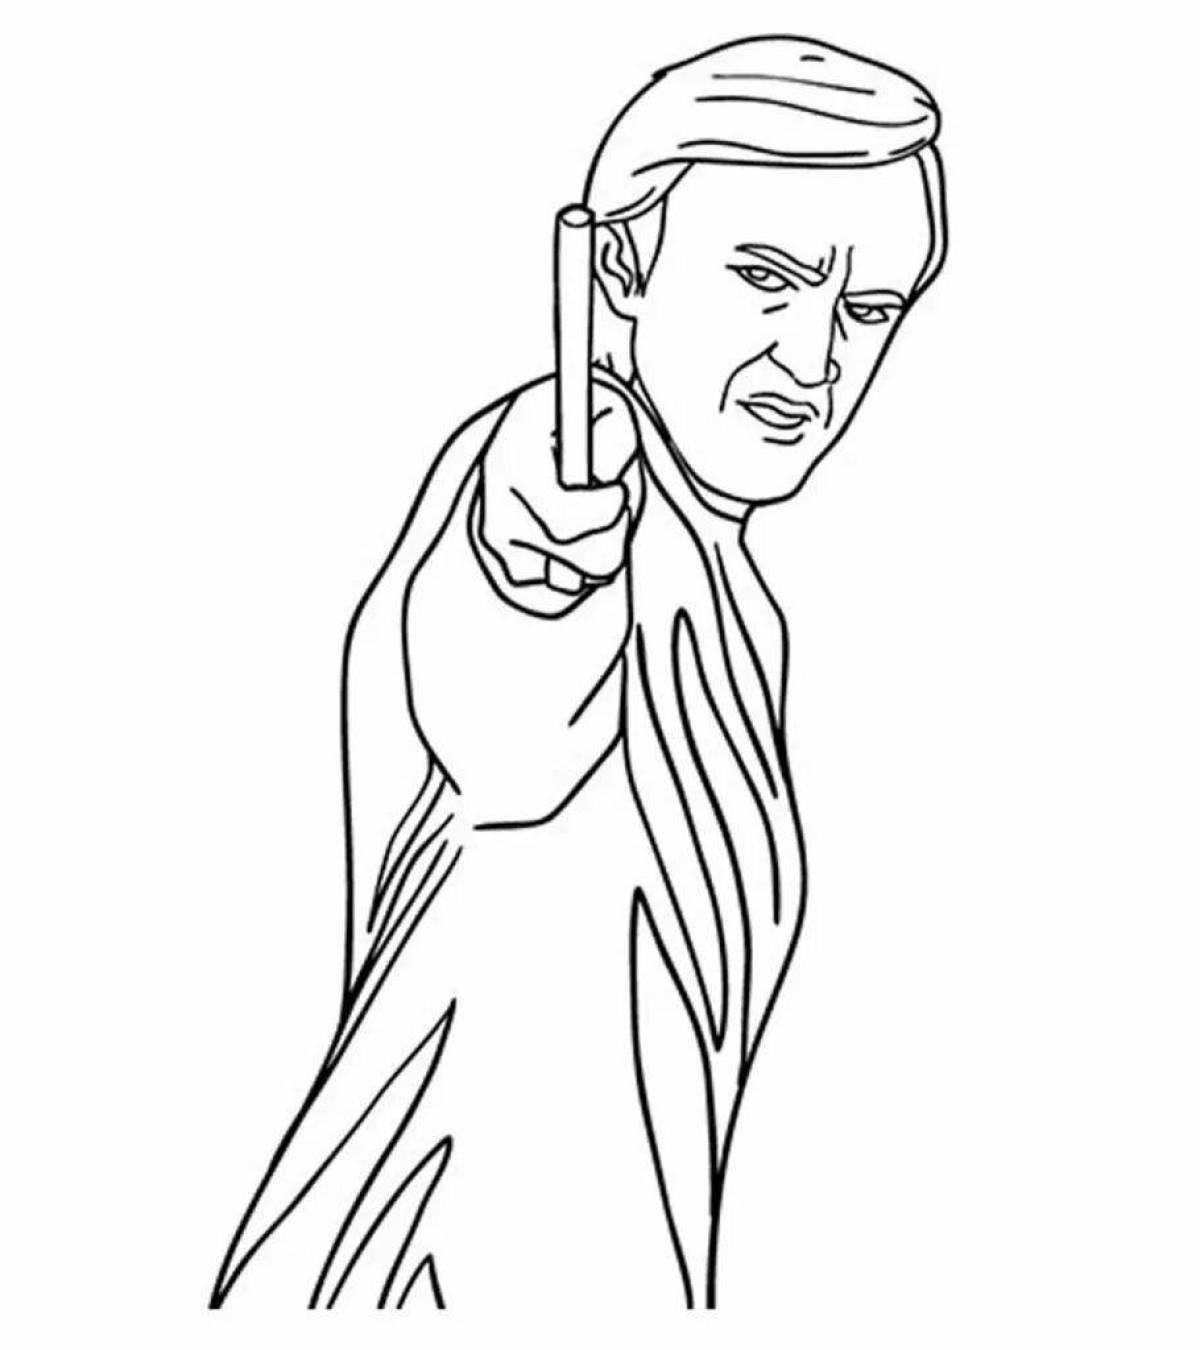 Draco malfoy spiral coloring book